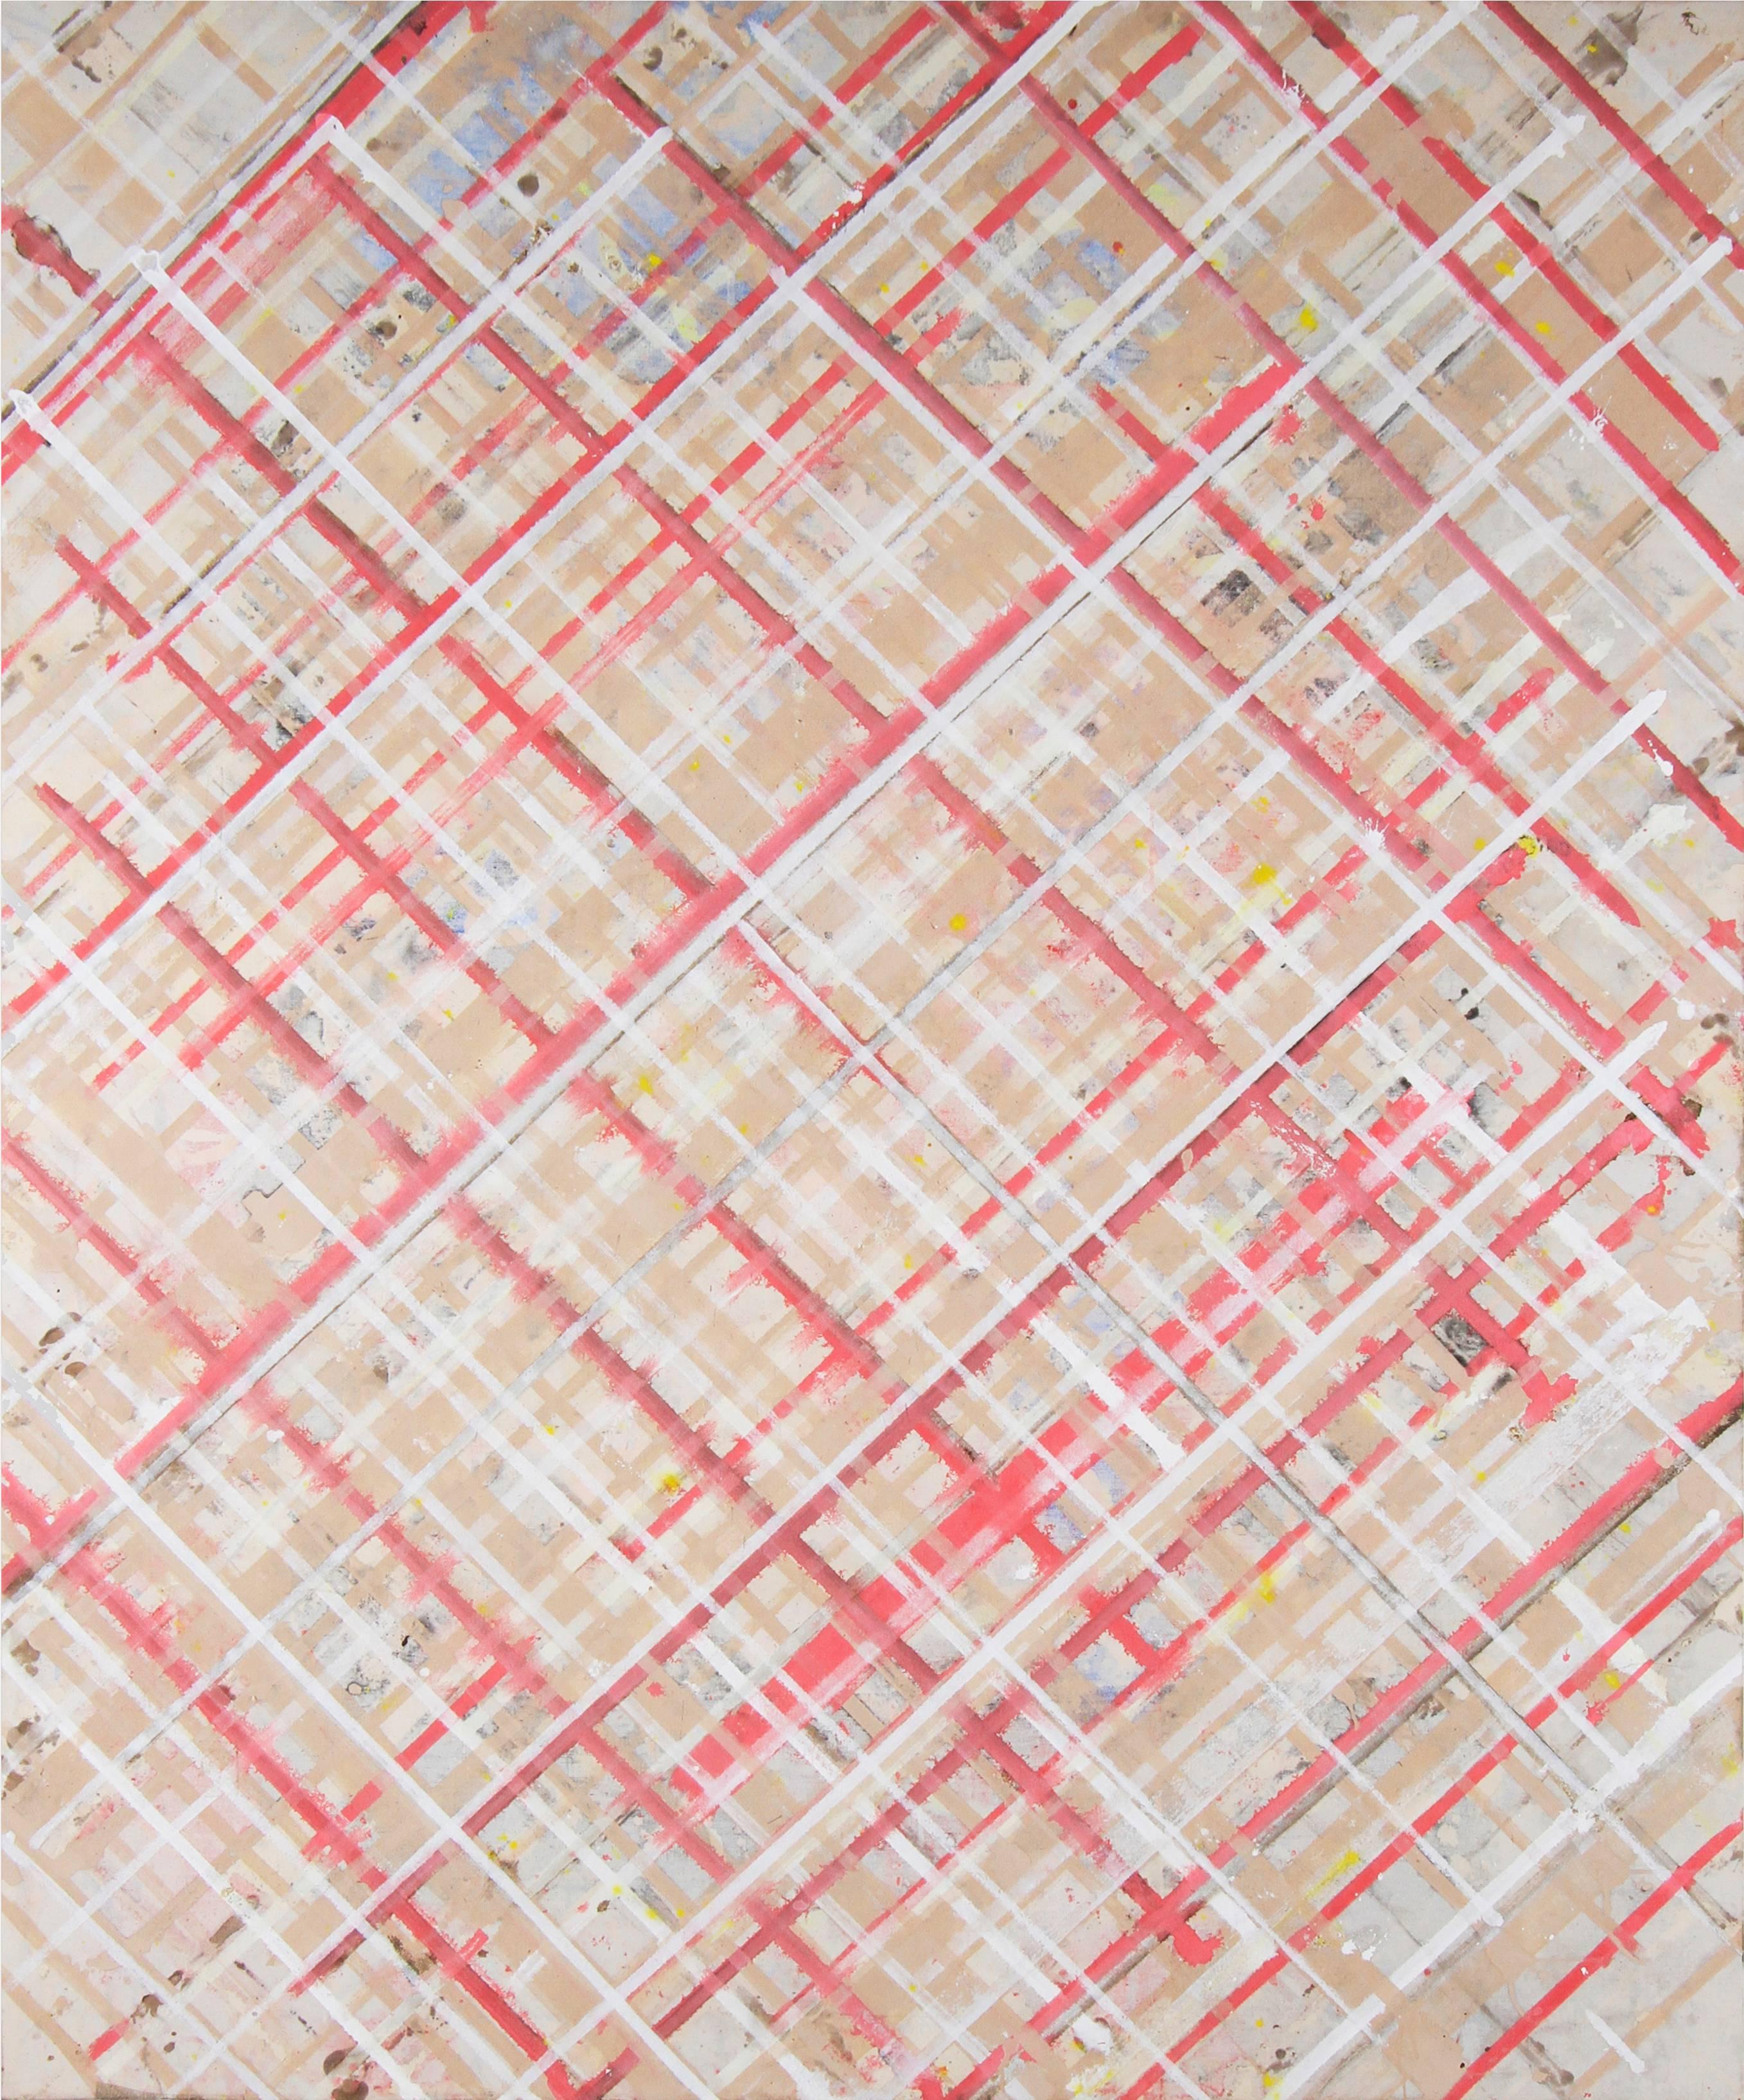 Ed Moses Abstract Painting - Pink Grid #1